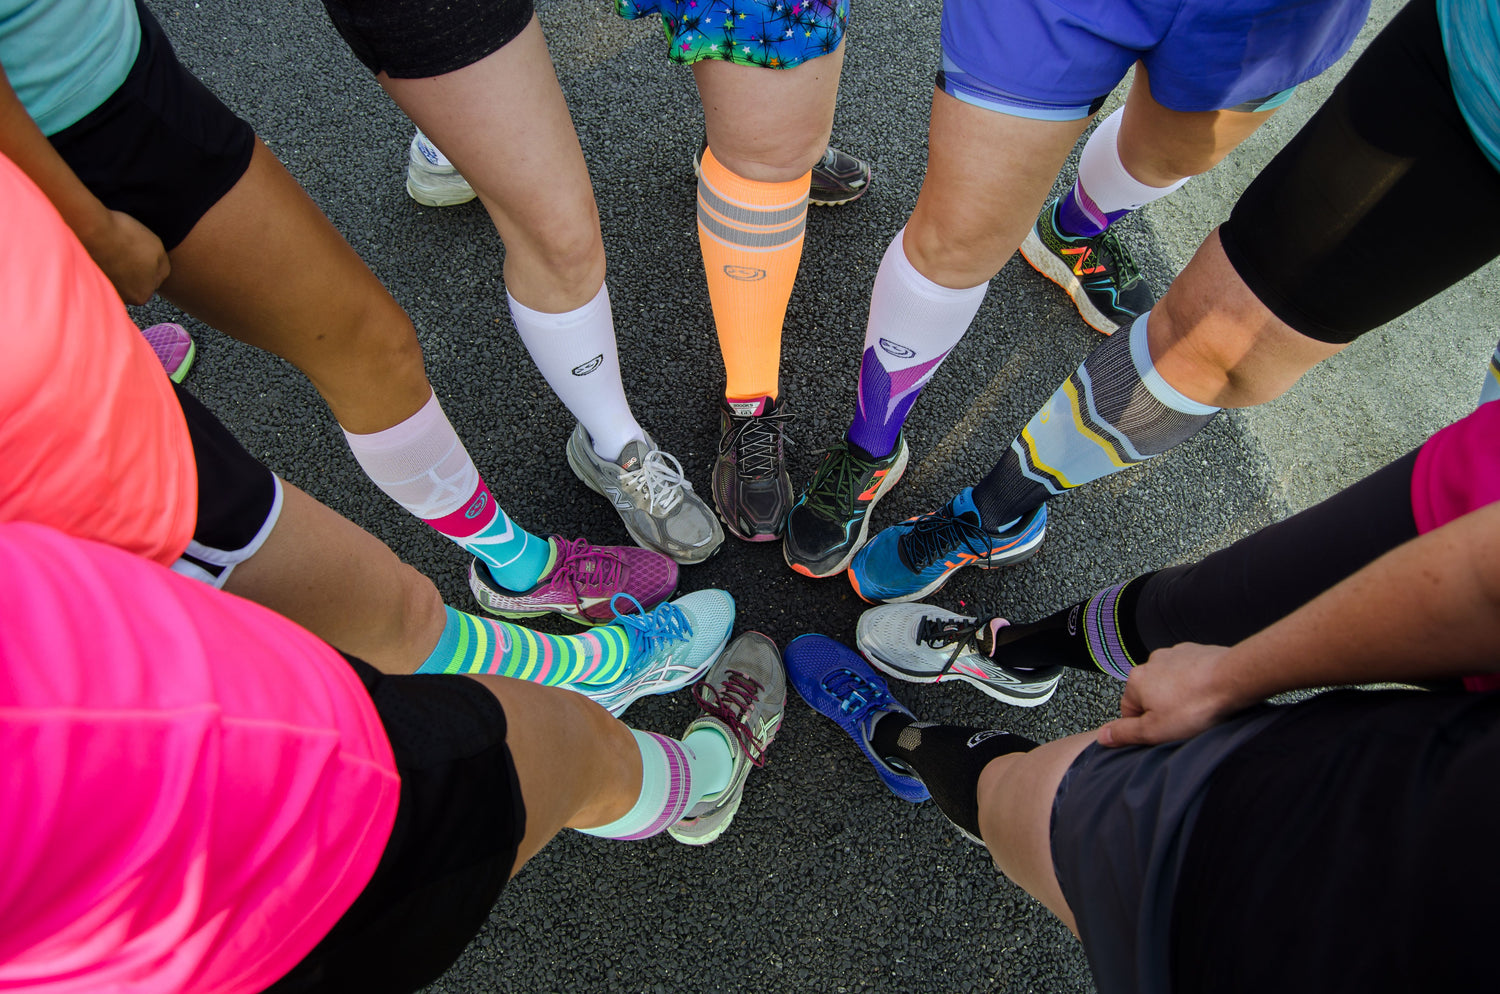 Do Your Socks Stay Up? Over-the-Calf/Knee-High vs Mid-Calf/Trouser –